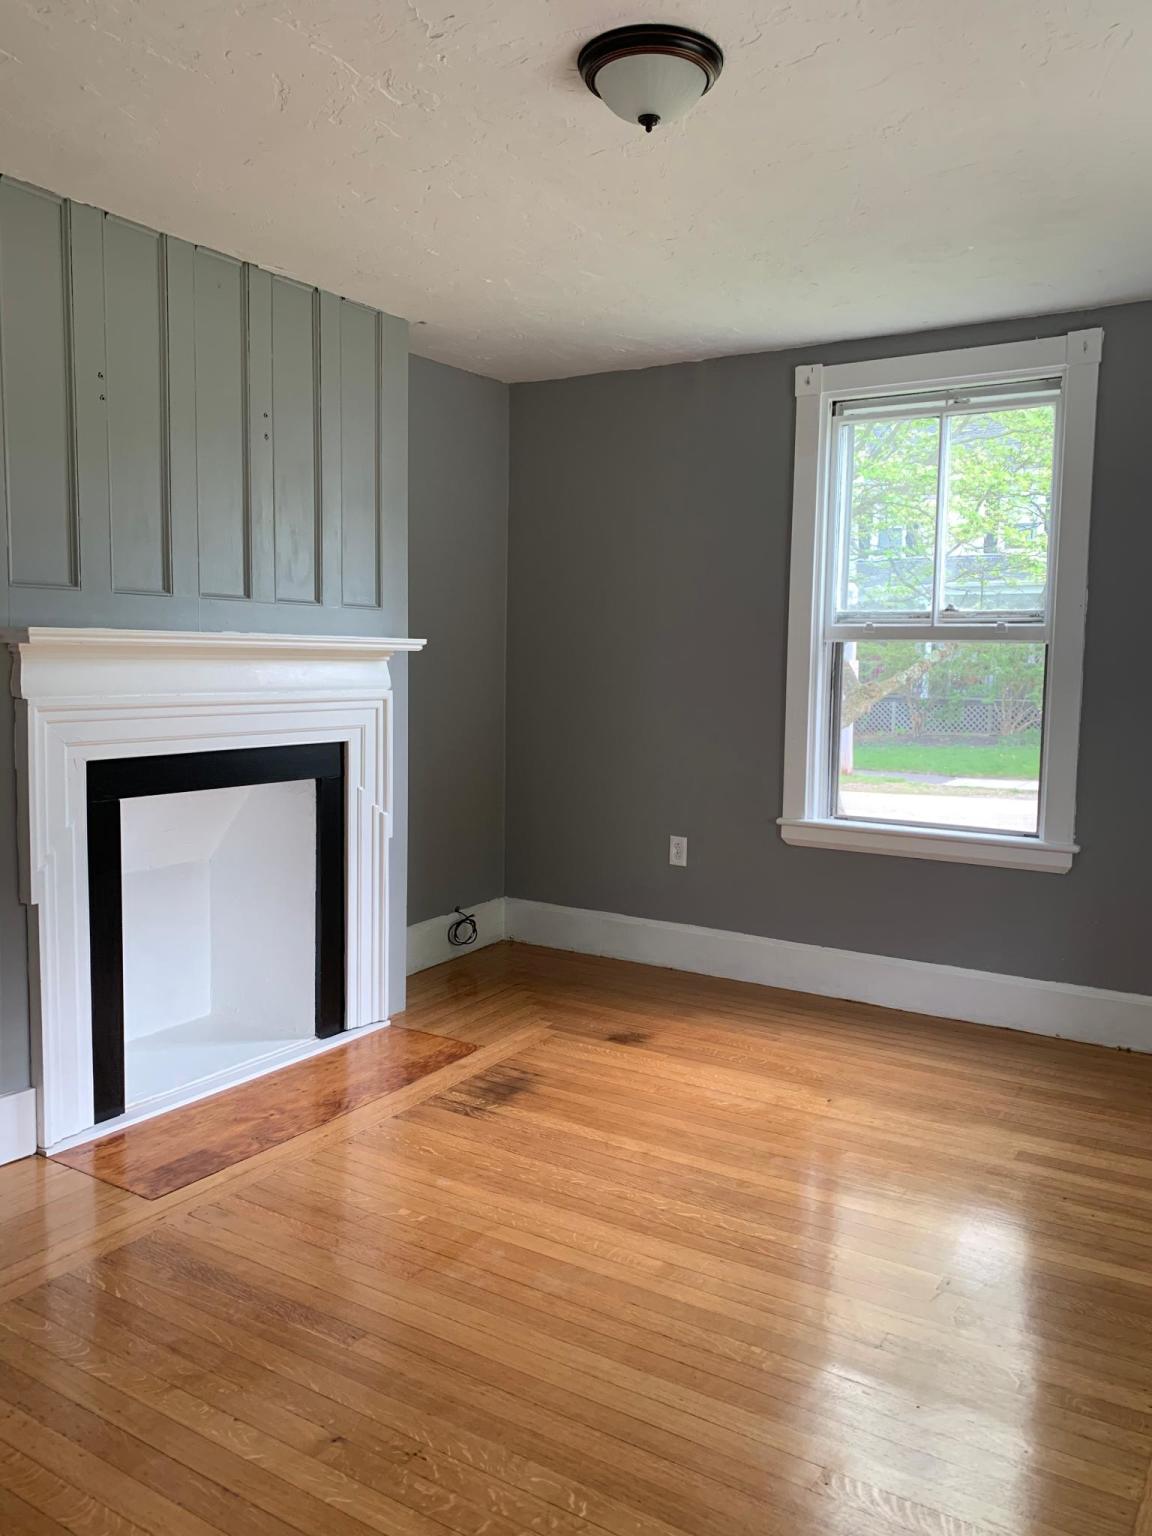 Norwood Fireplace New 92 Walpole St 1 norwood Ma 1 Bed 1 Bath Multi Family Home for Rent 6 S